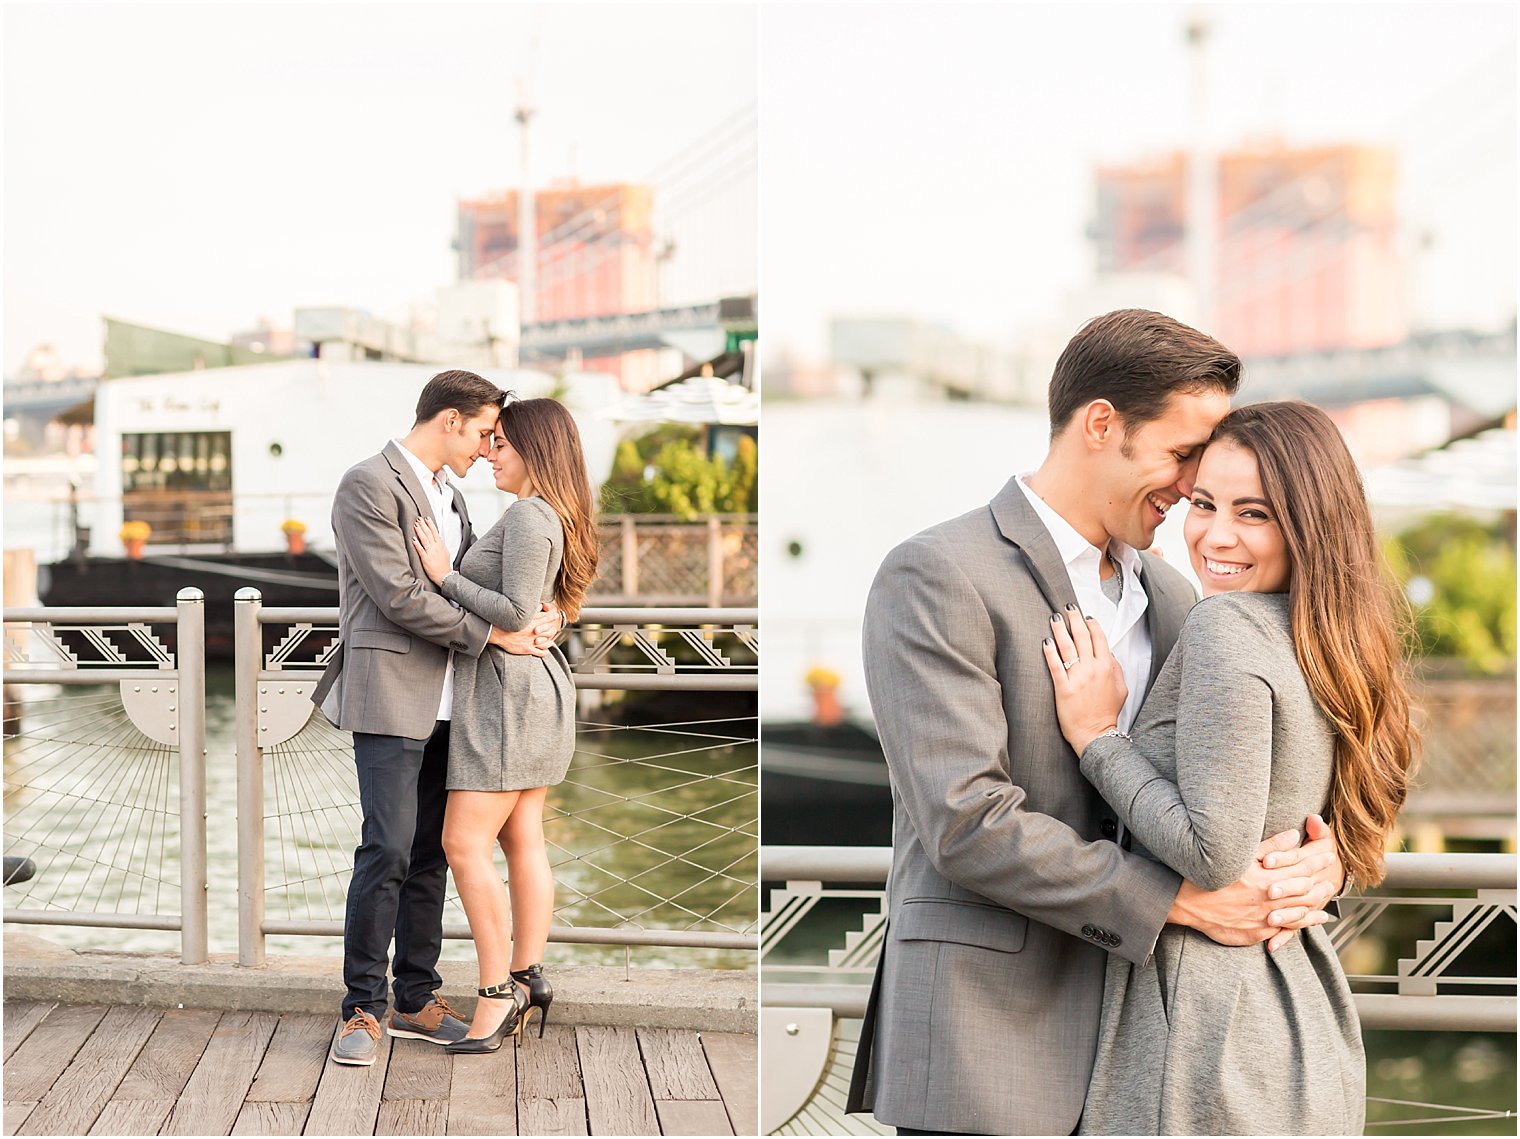 Engagement photos in NYC